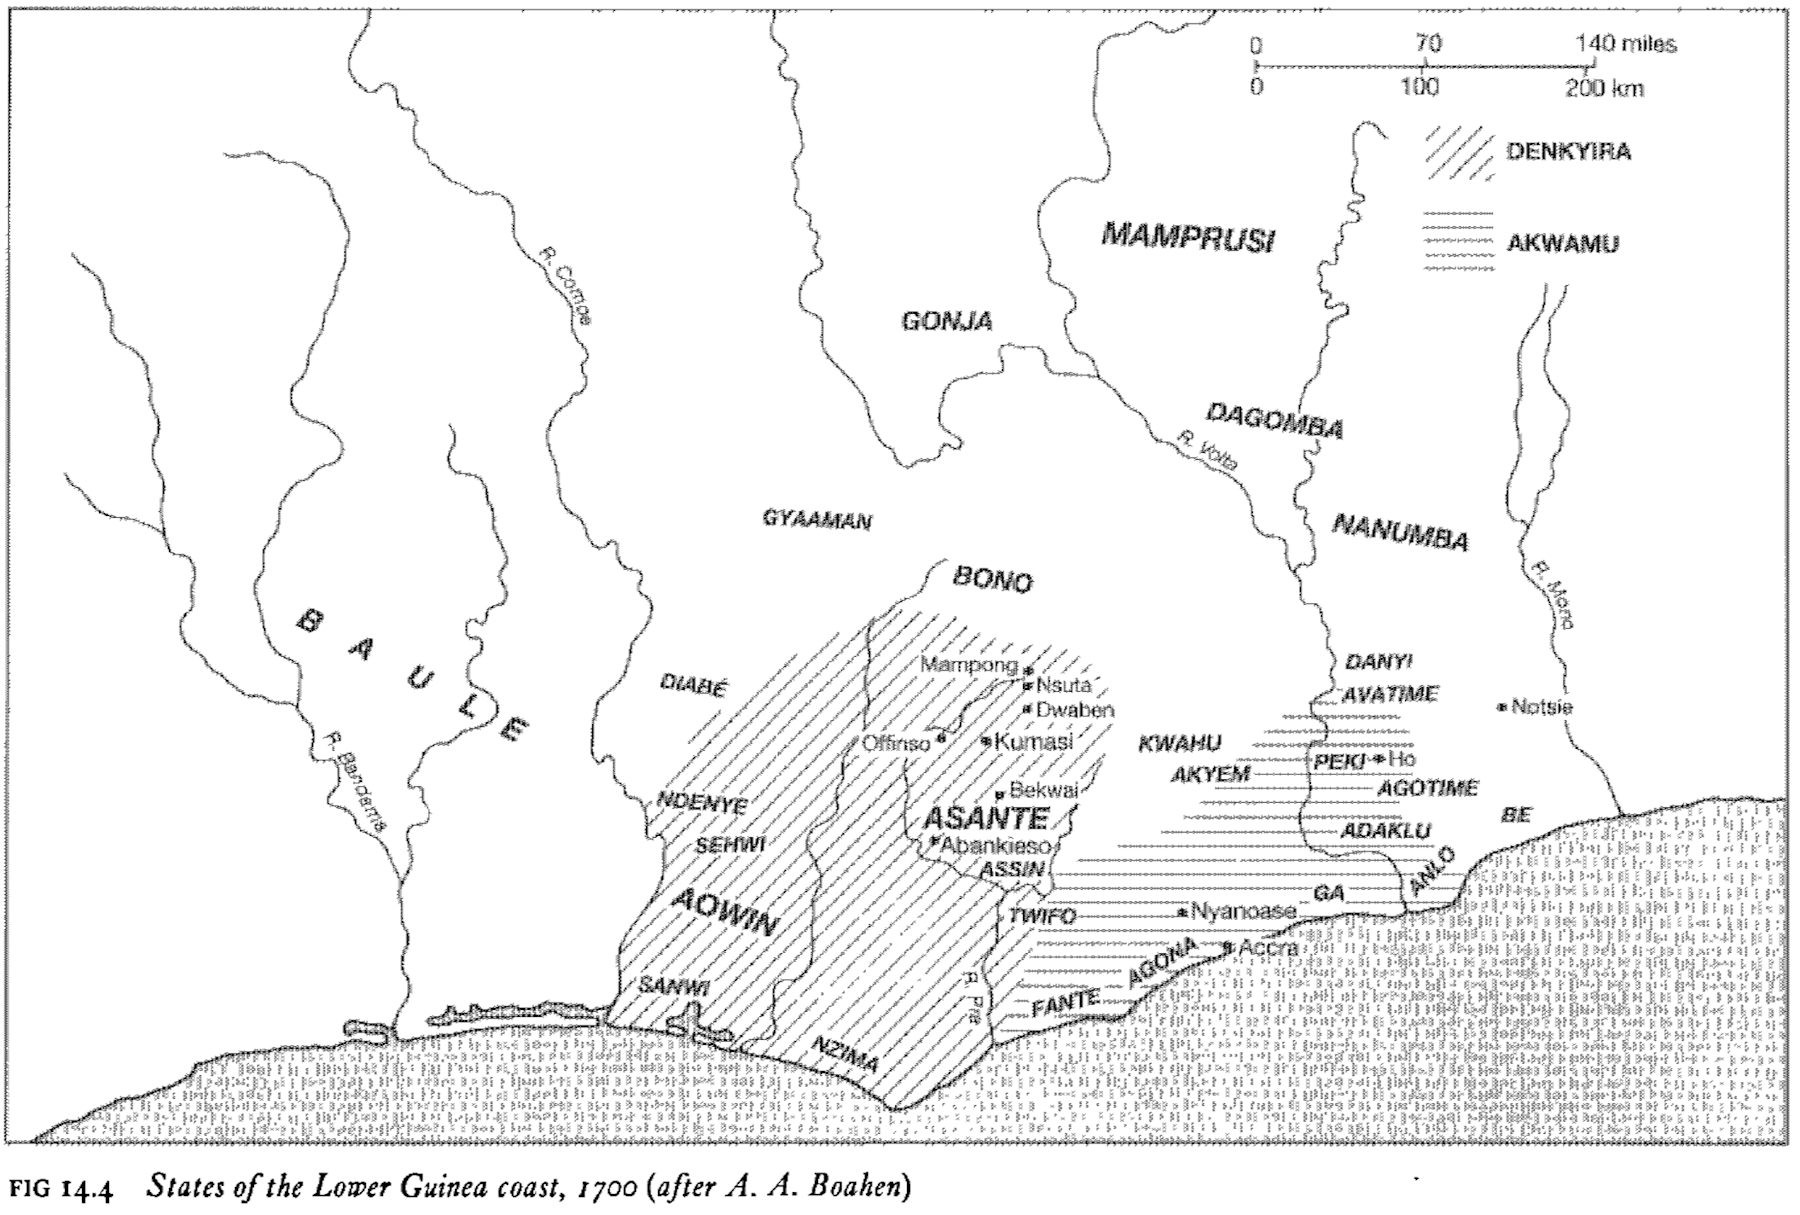 States of the Lower Guinea coast, 1700-.png